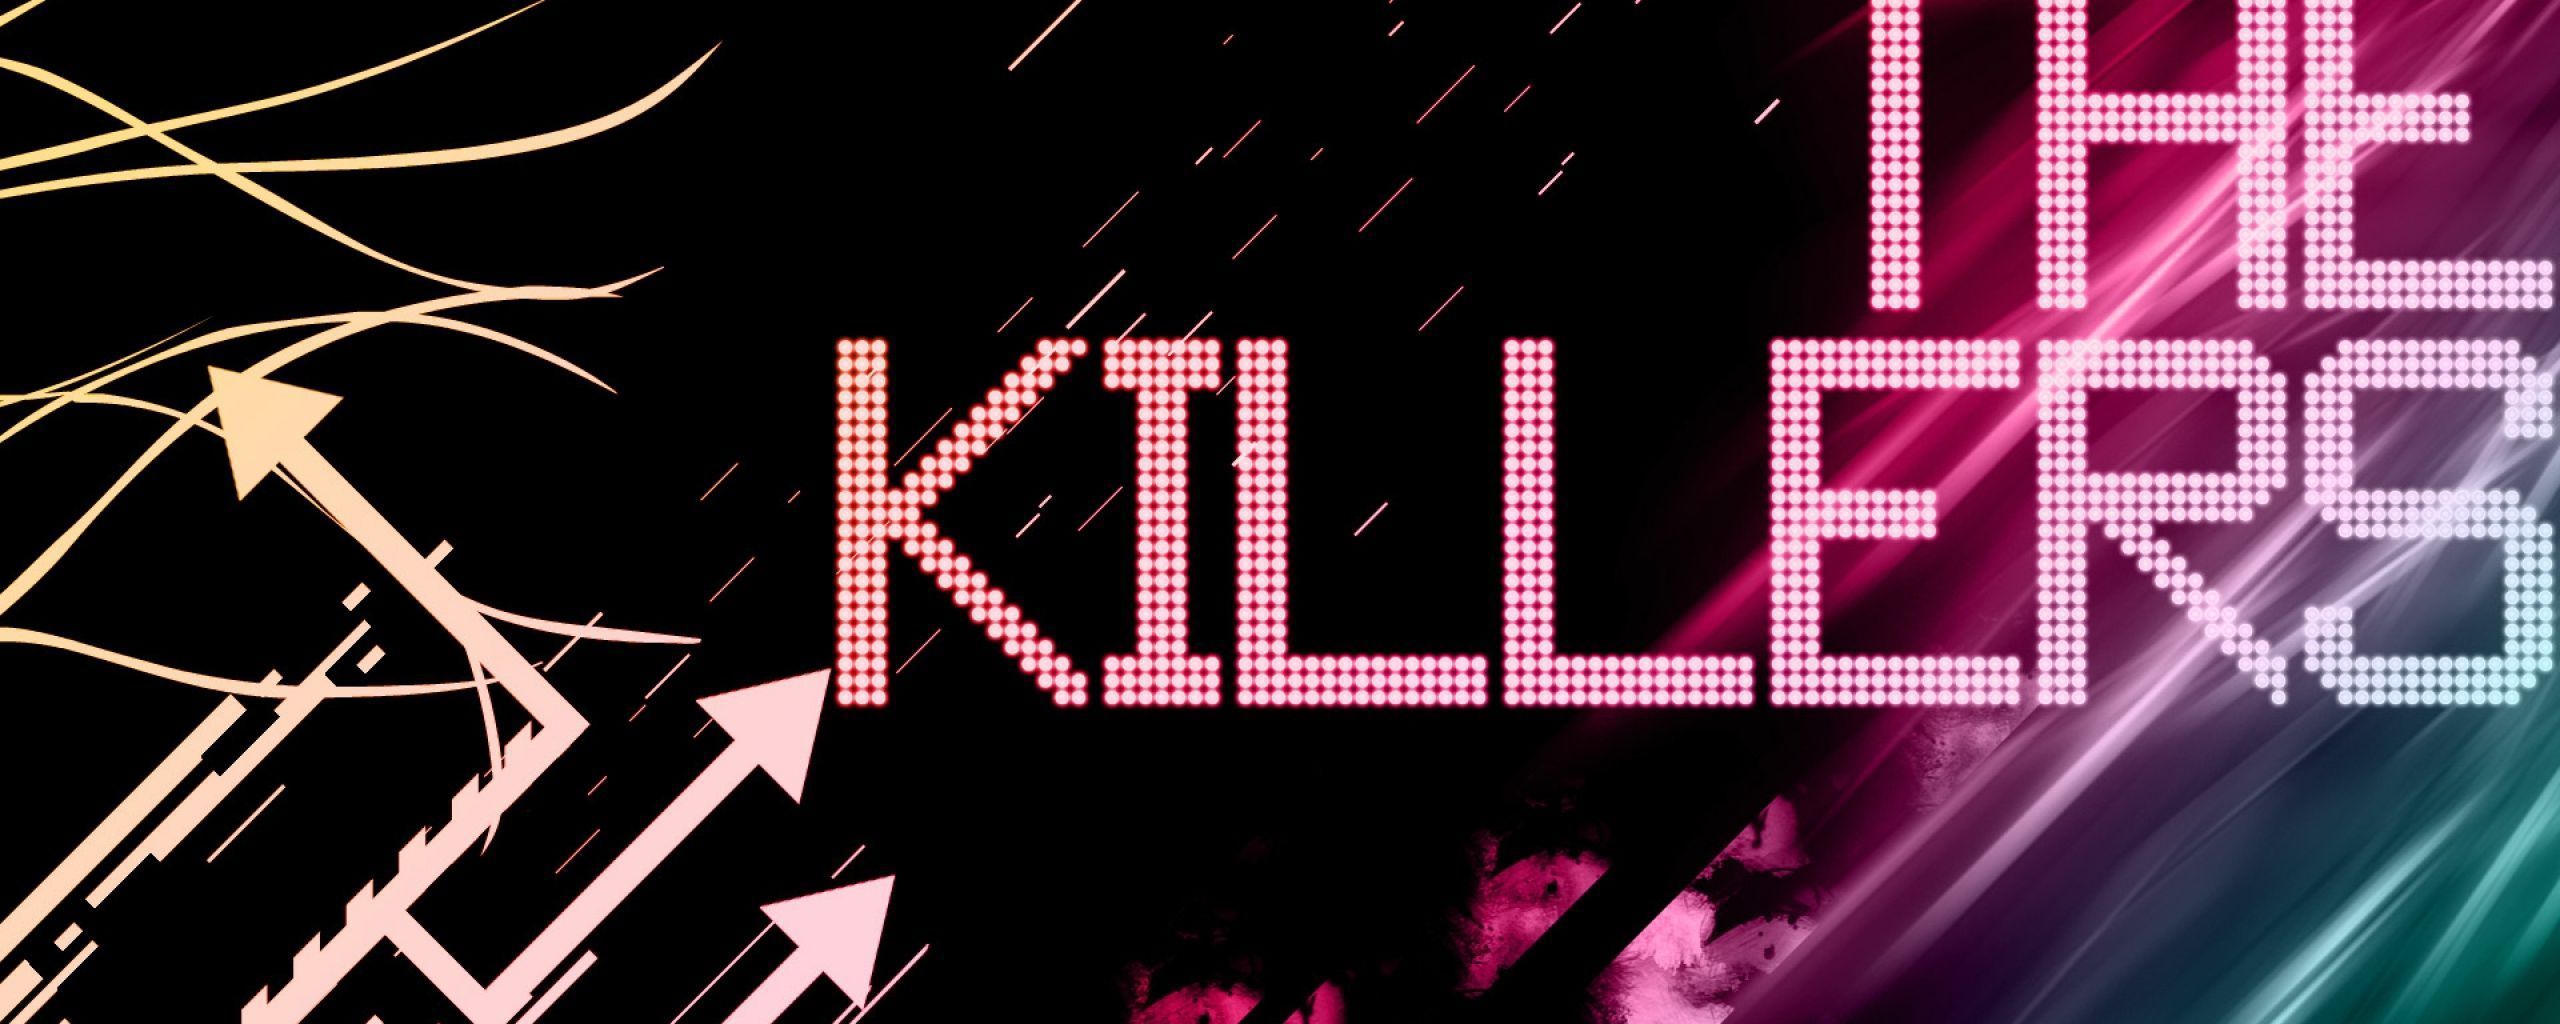 Download Wallpaper 2560x1024 The killers, Name, Graphics, Arrows ...